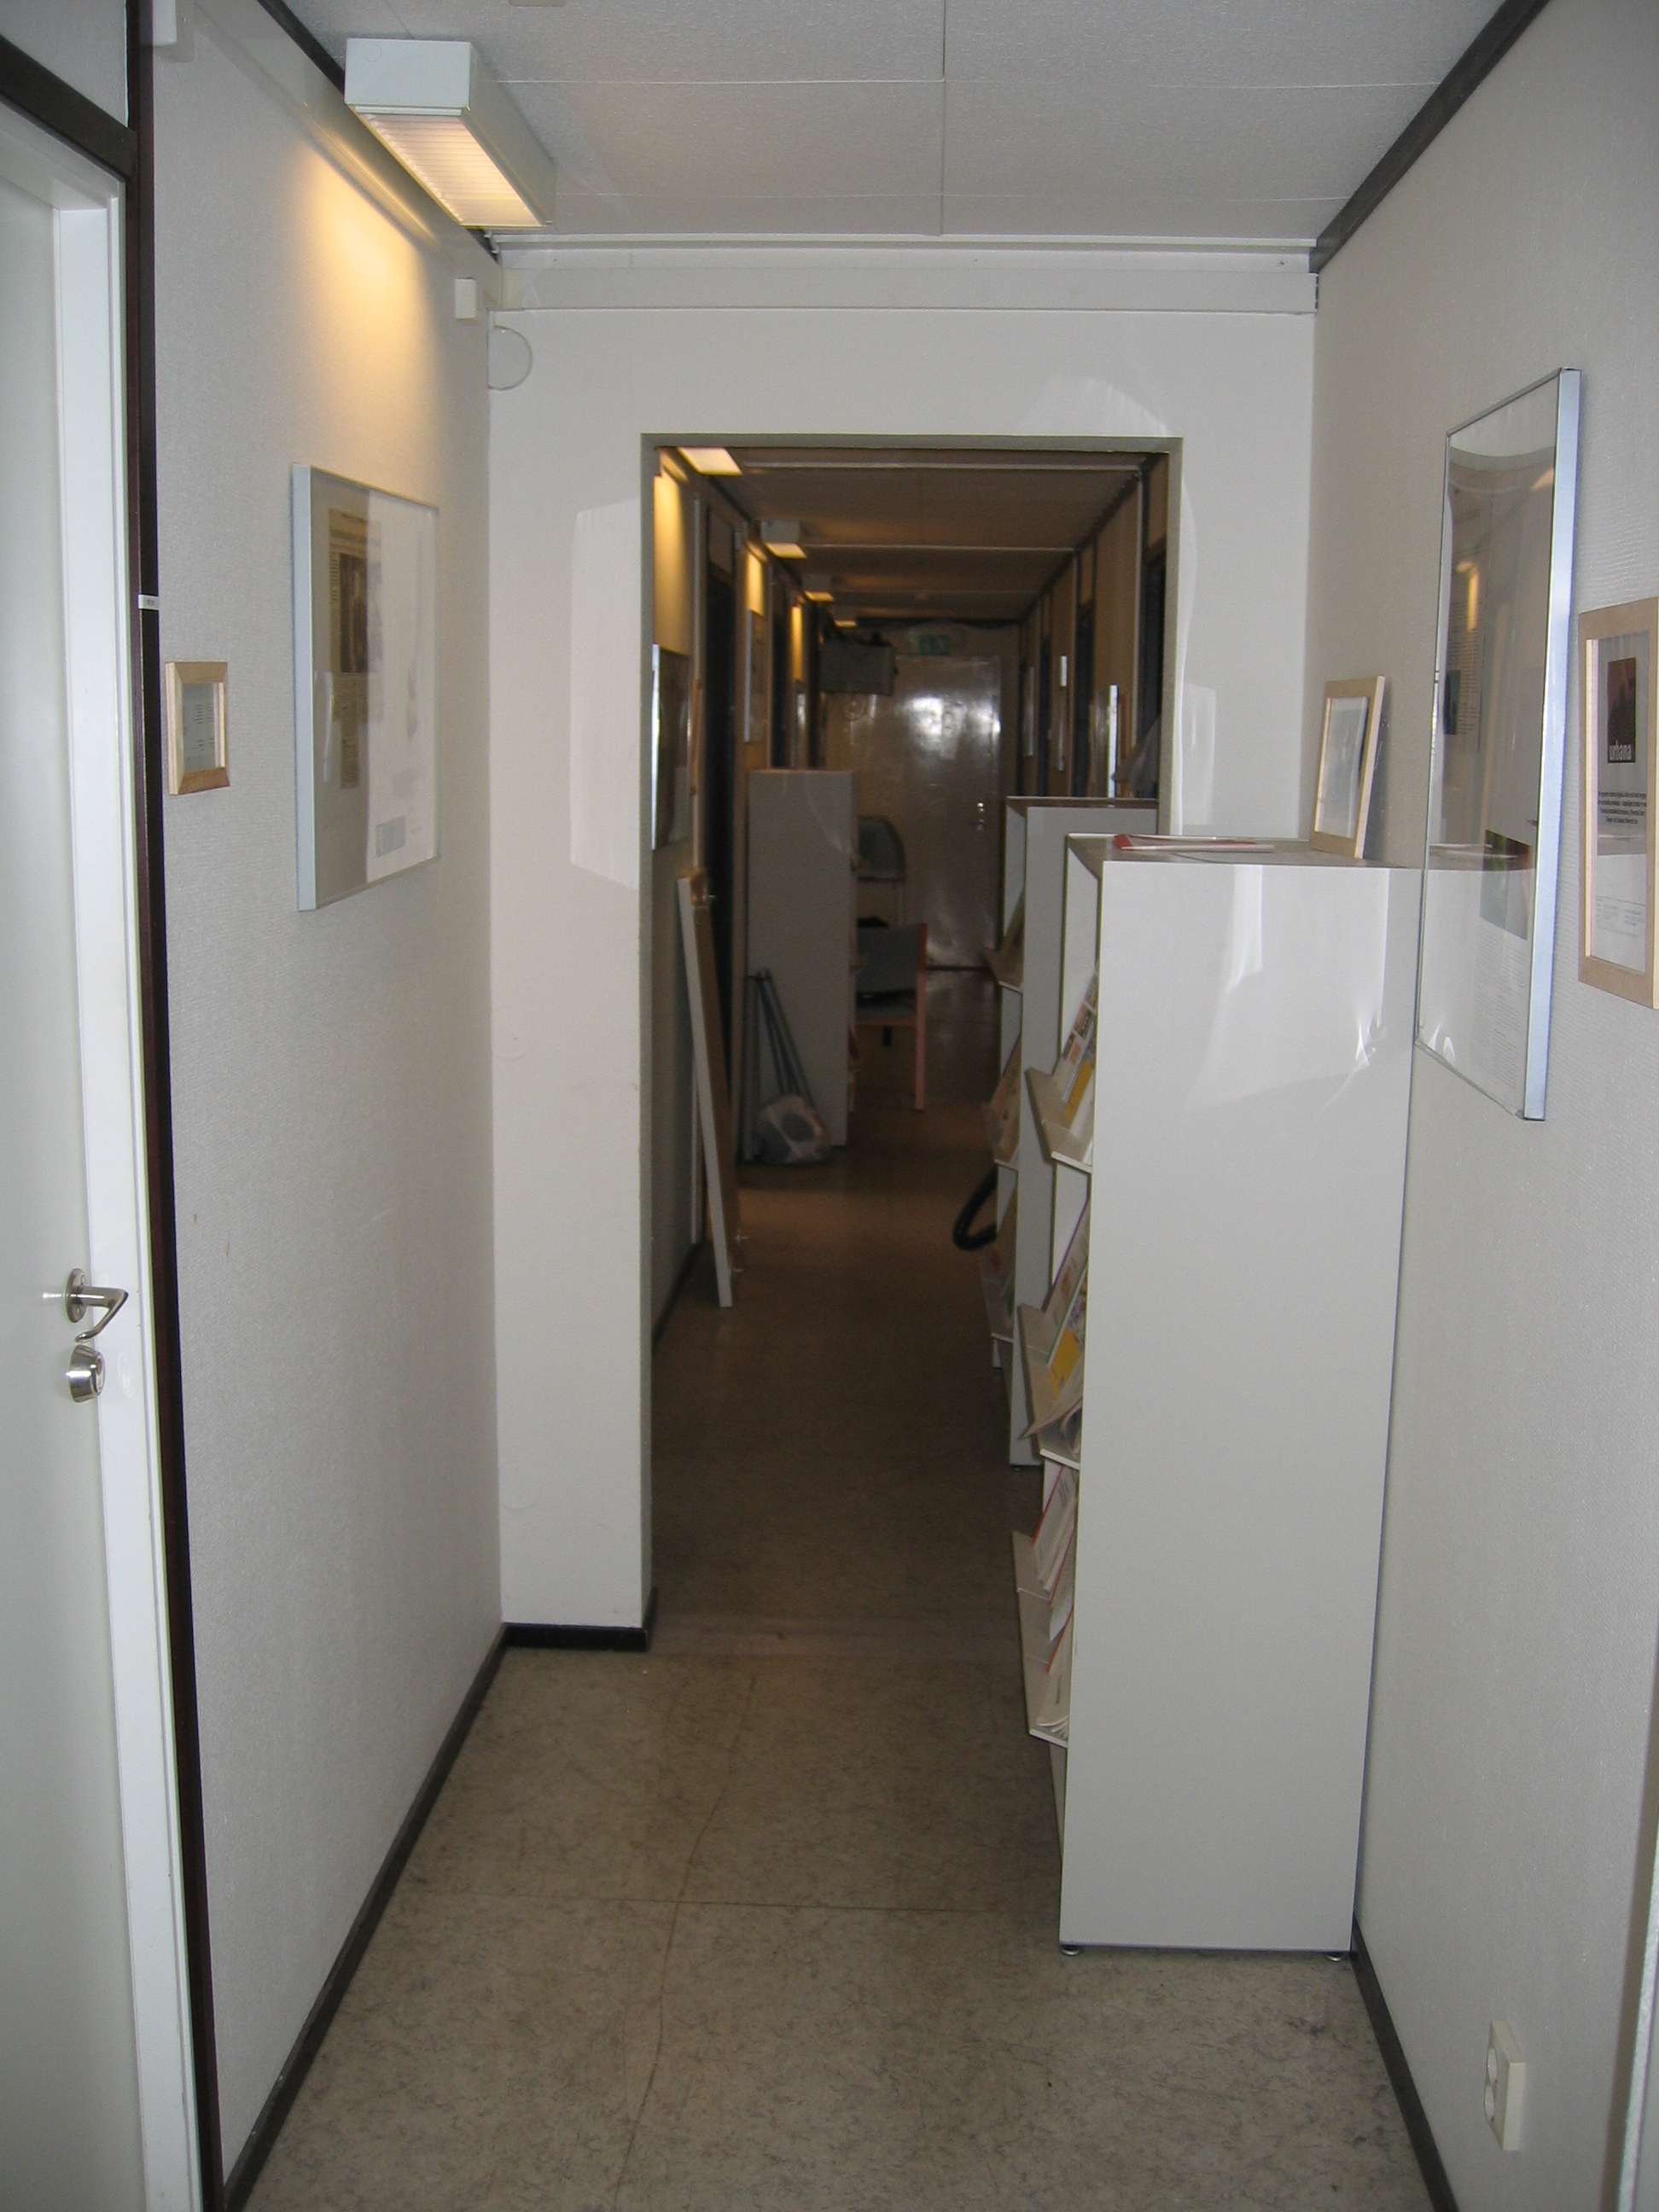 A picture of a narrow, interior corridor of the VentureLab office, including some shelves and framed images on the wall.